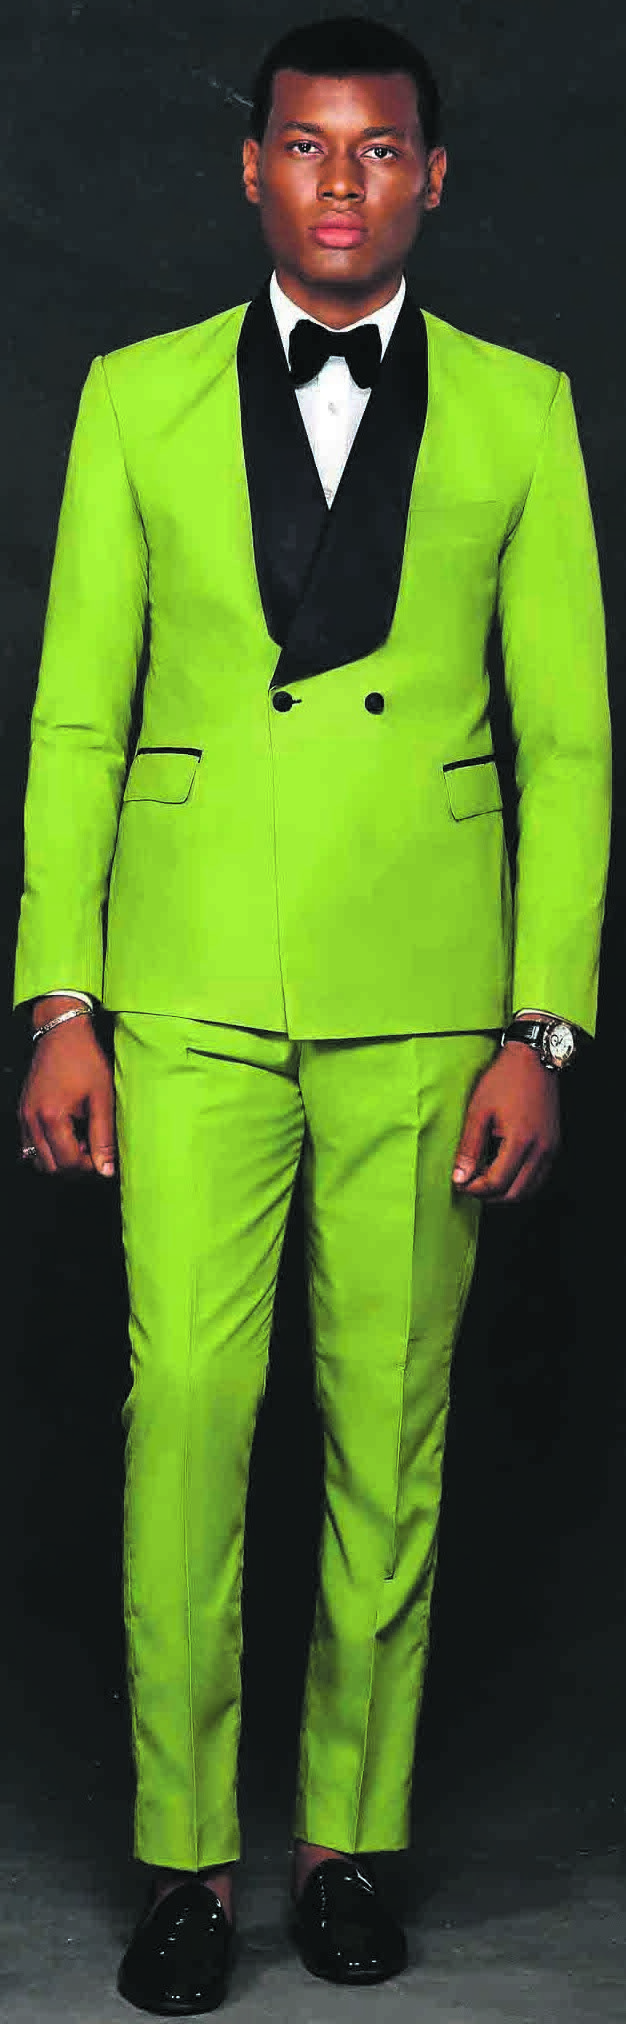 striking Kairos and Chronos collection features this bold lime green suit PHOTO:  